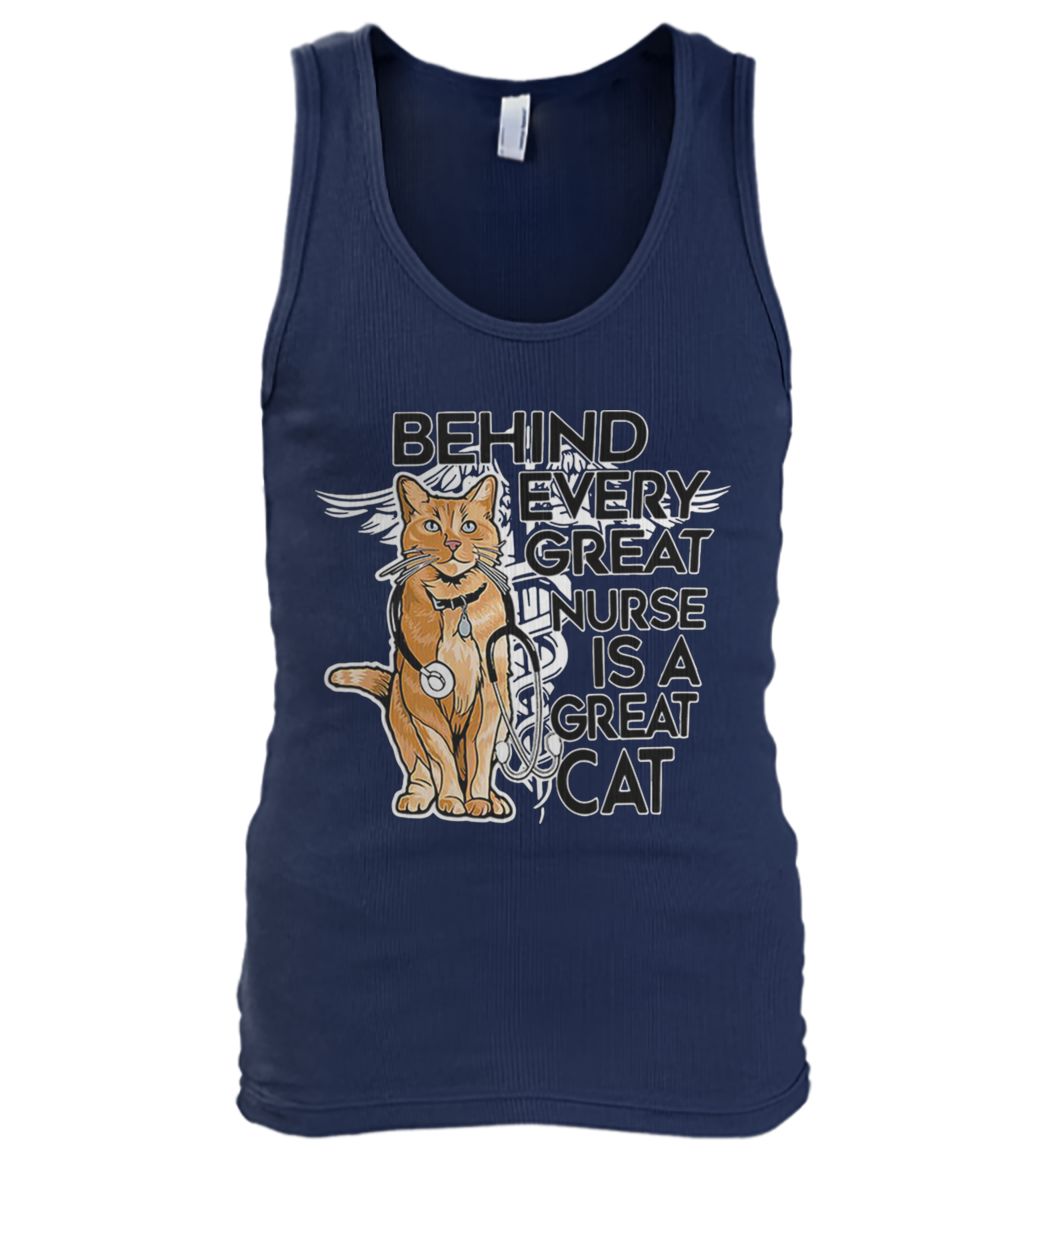 Behind every great nurse is a great captain marvel goose cat men's tank top